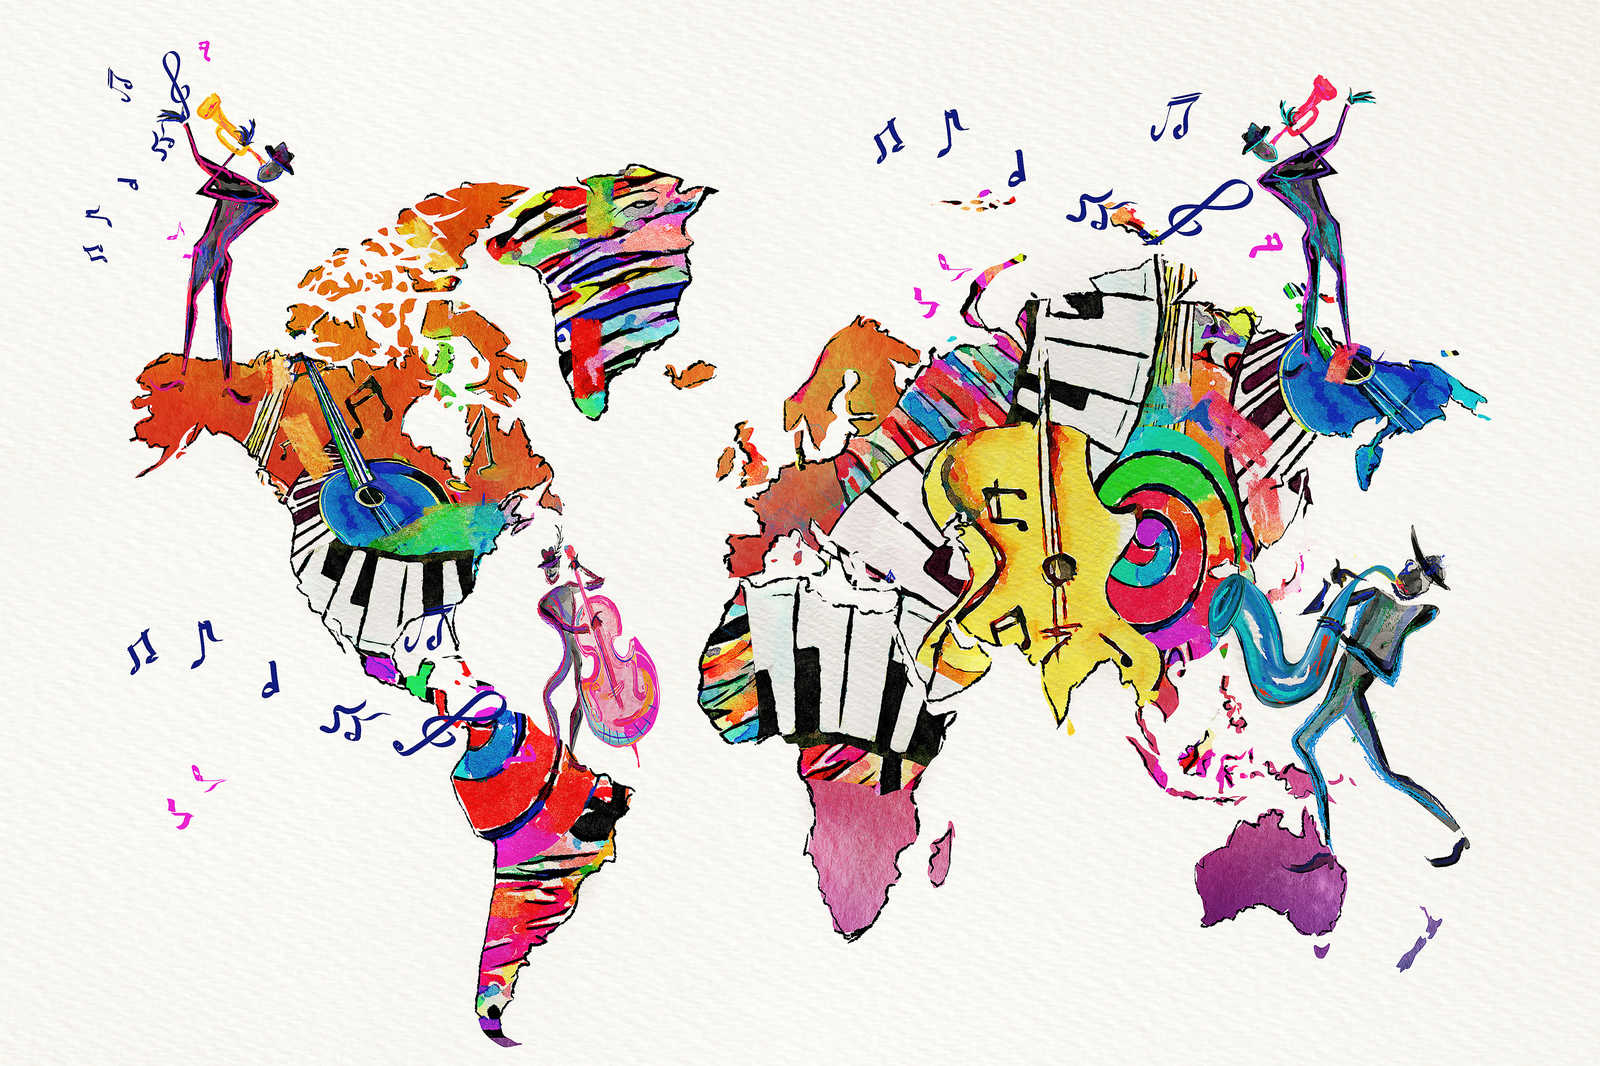             Canvas painting with world map filled with instruments and clefs - 0.90 m x 0.60 m
        